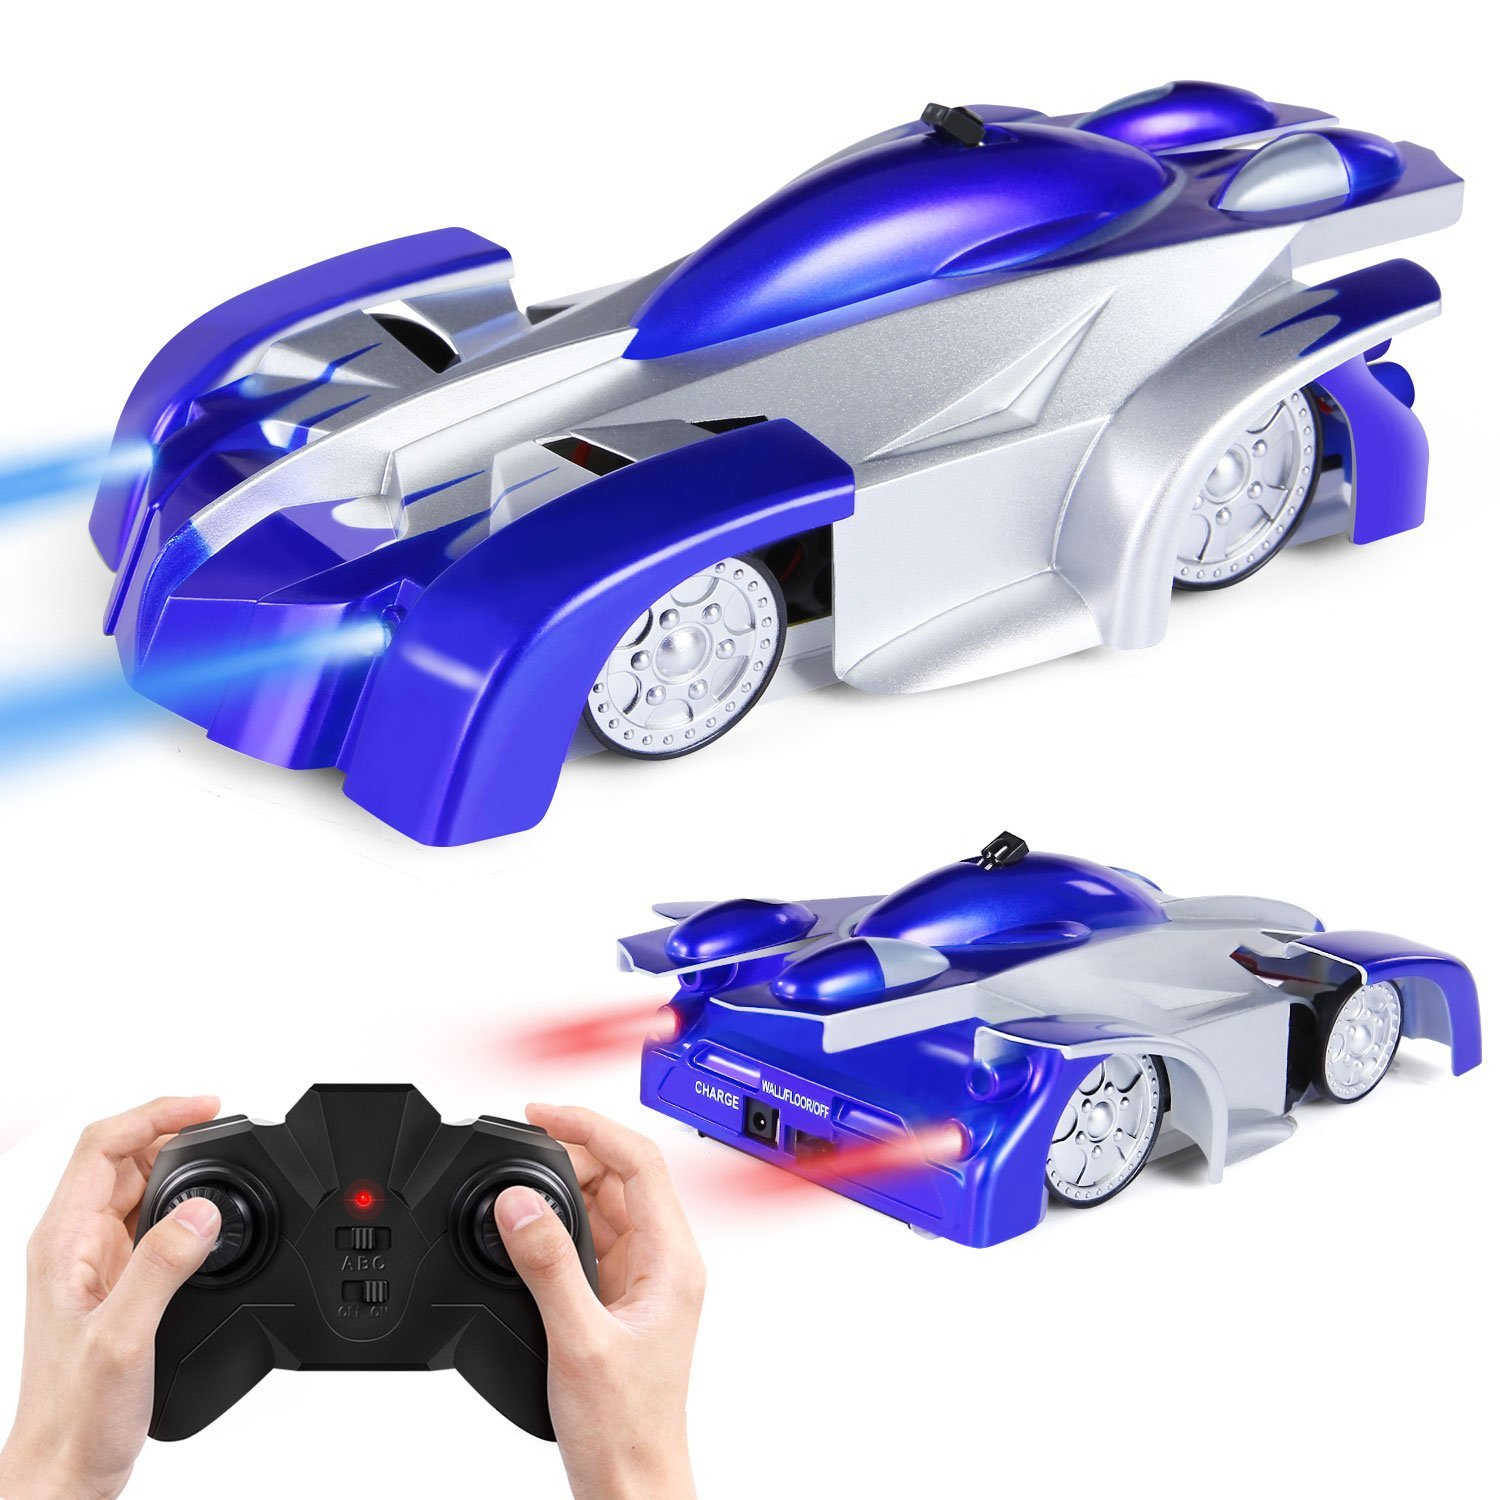 Amazon.com: SGILE Remote Control Car Toy, Rechargeable RC Wall ...